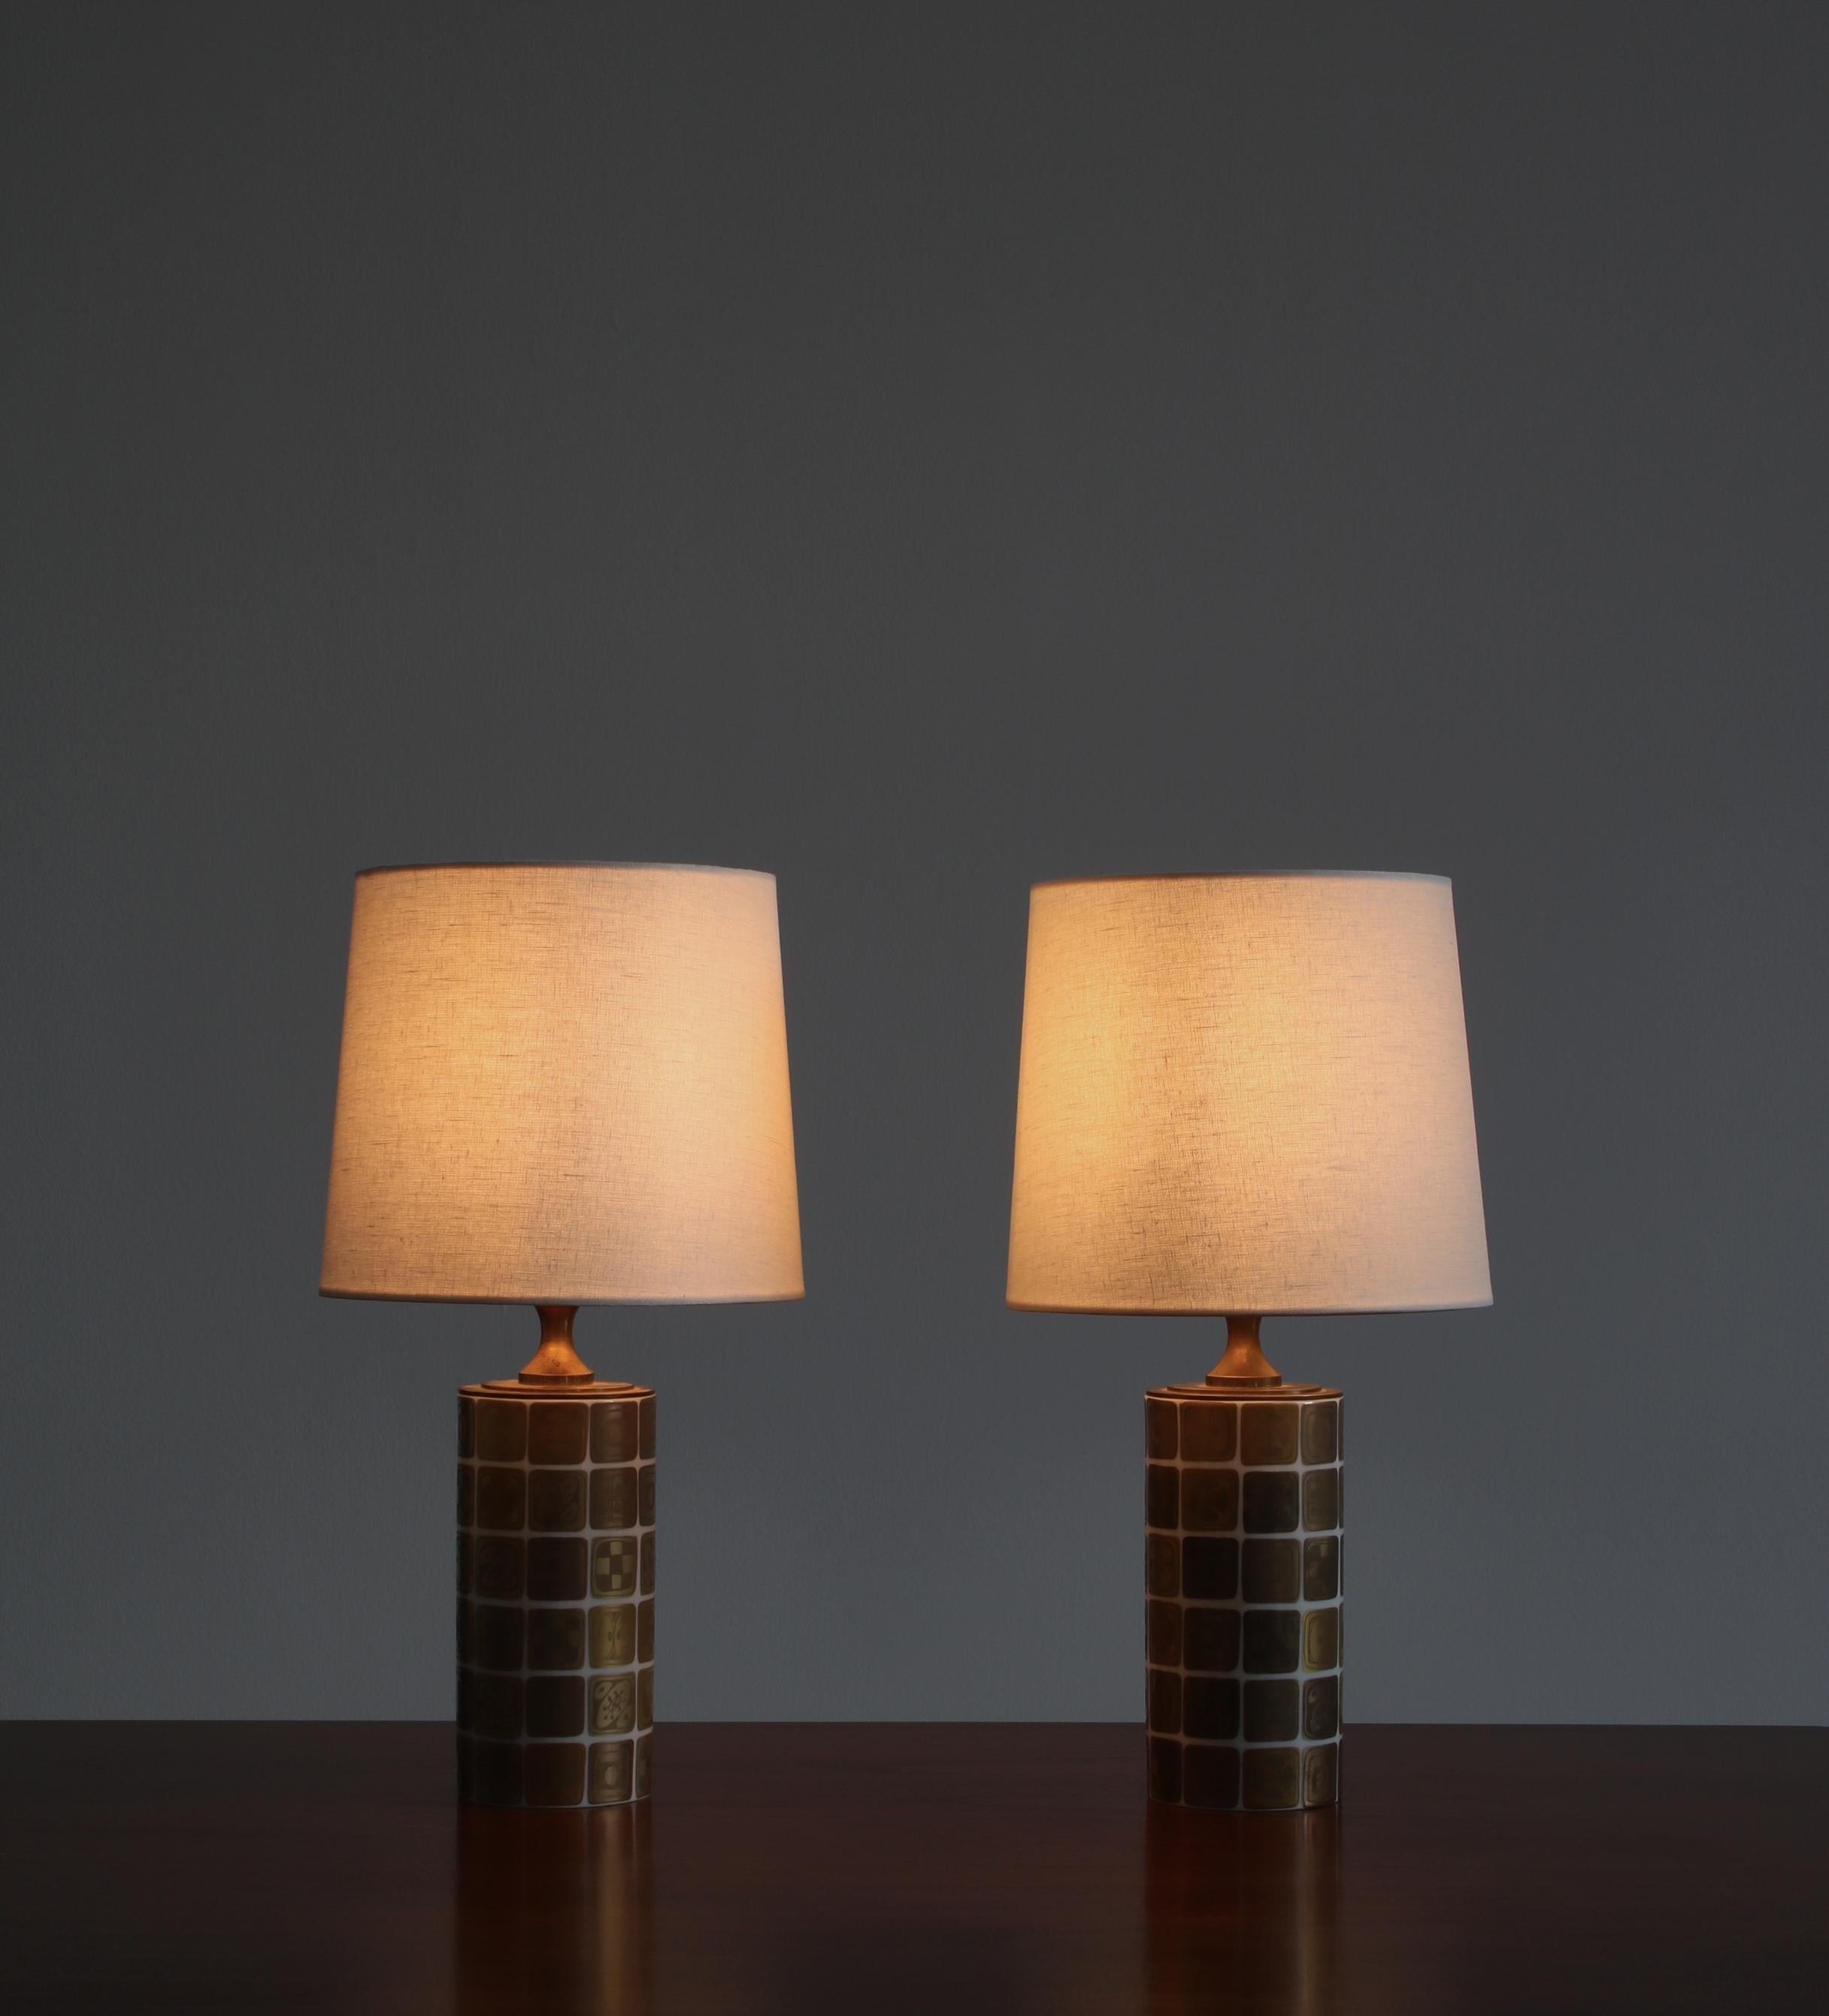 Set of Porcelain Table Lamps in Gold Decor by Bjørn Wiinblad for Rosenthal, 1961 In Good Condition For Sale In Odense, DK